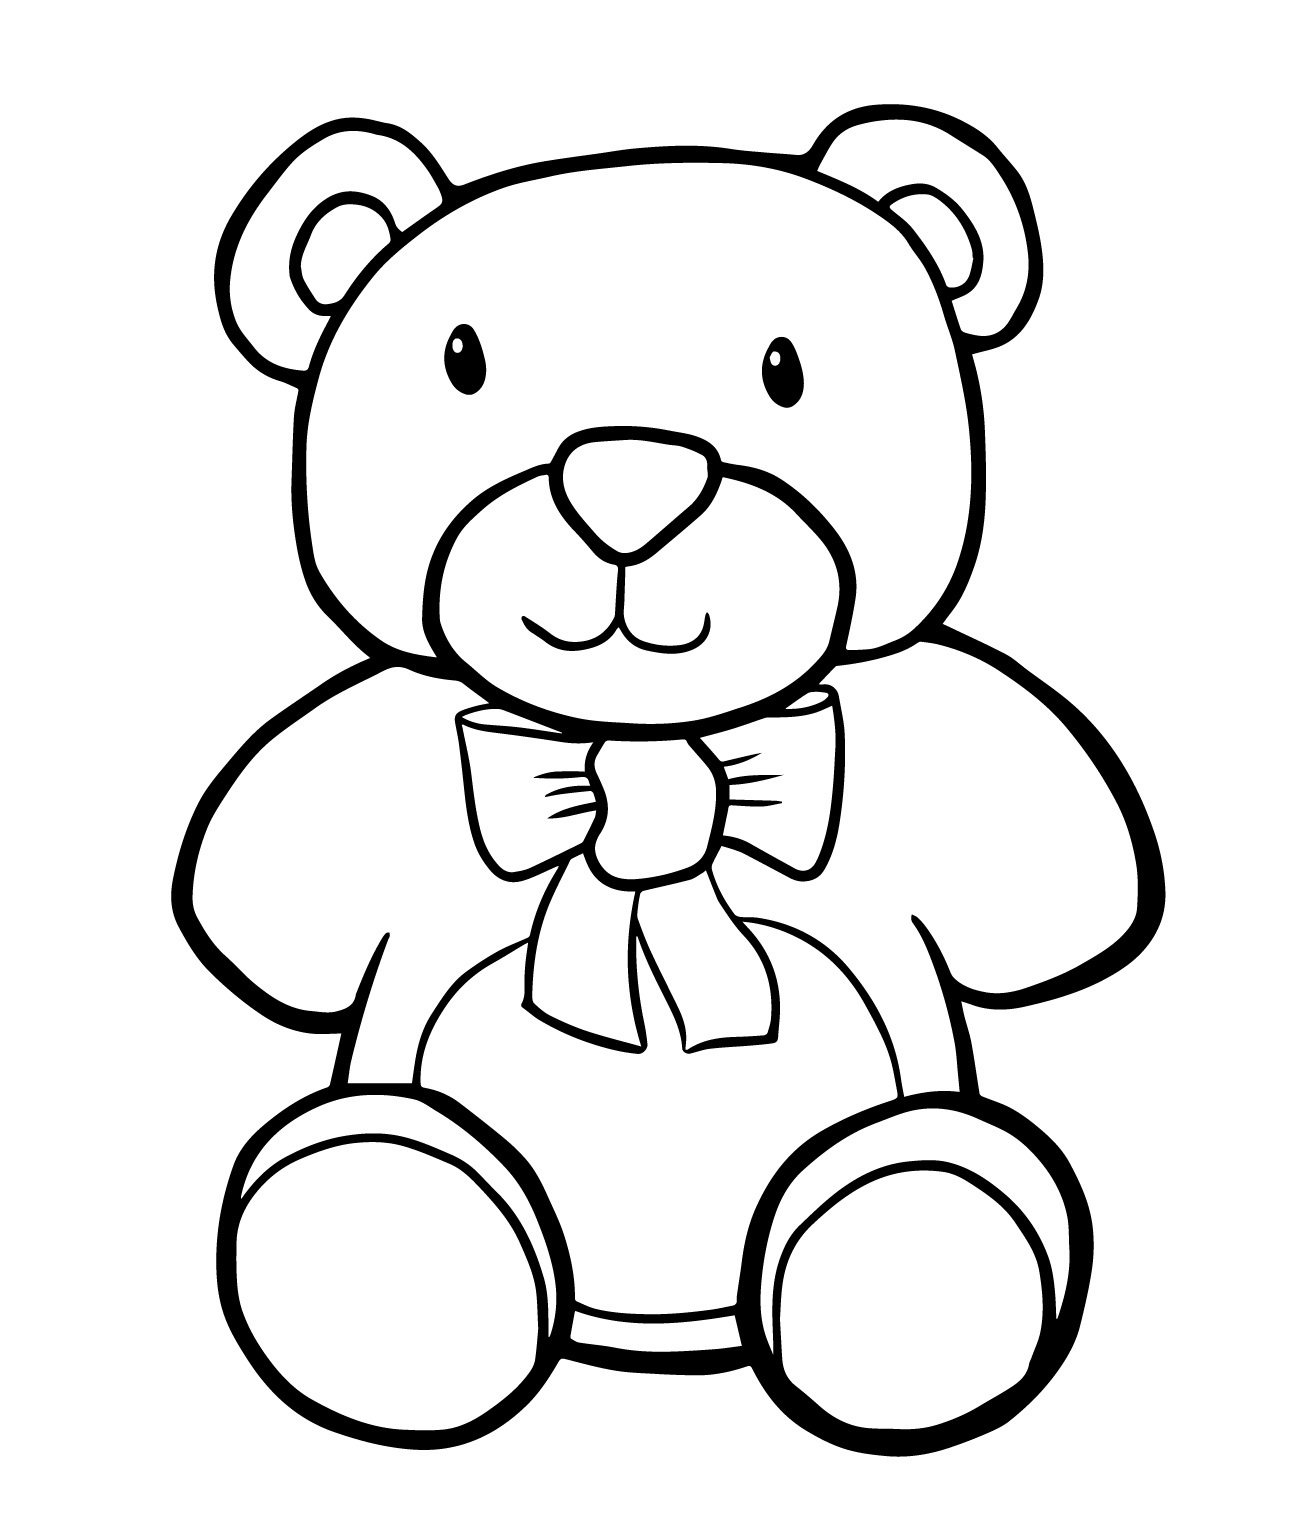 Printable Teddy Bear Coloring Pages - Printable Word Searches